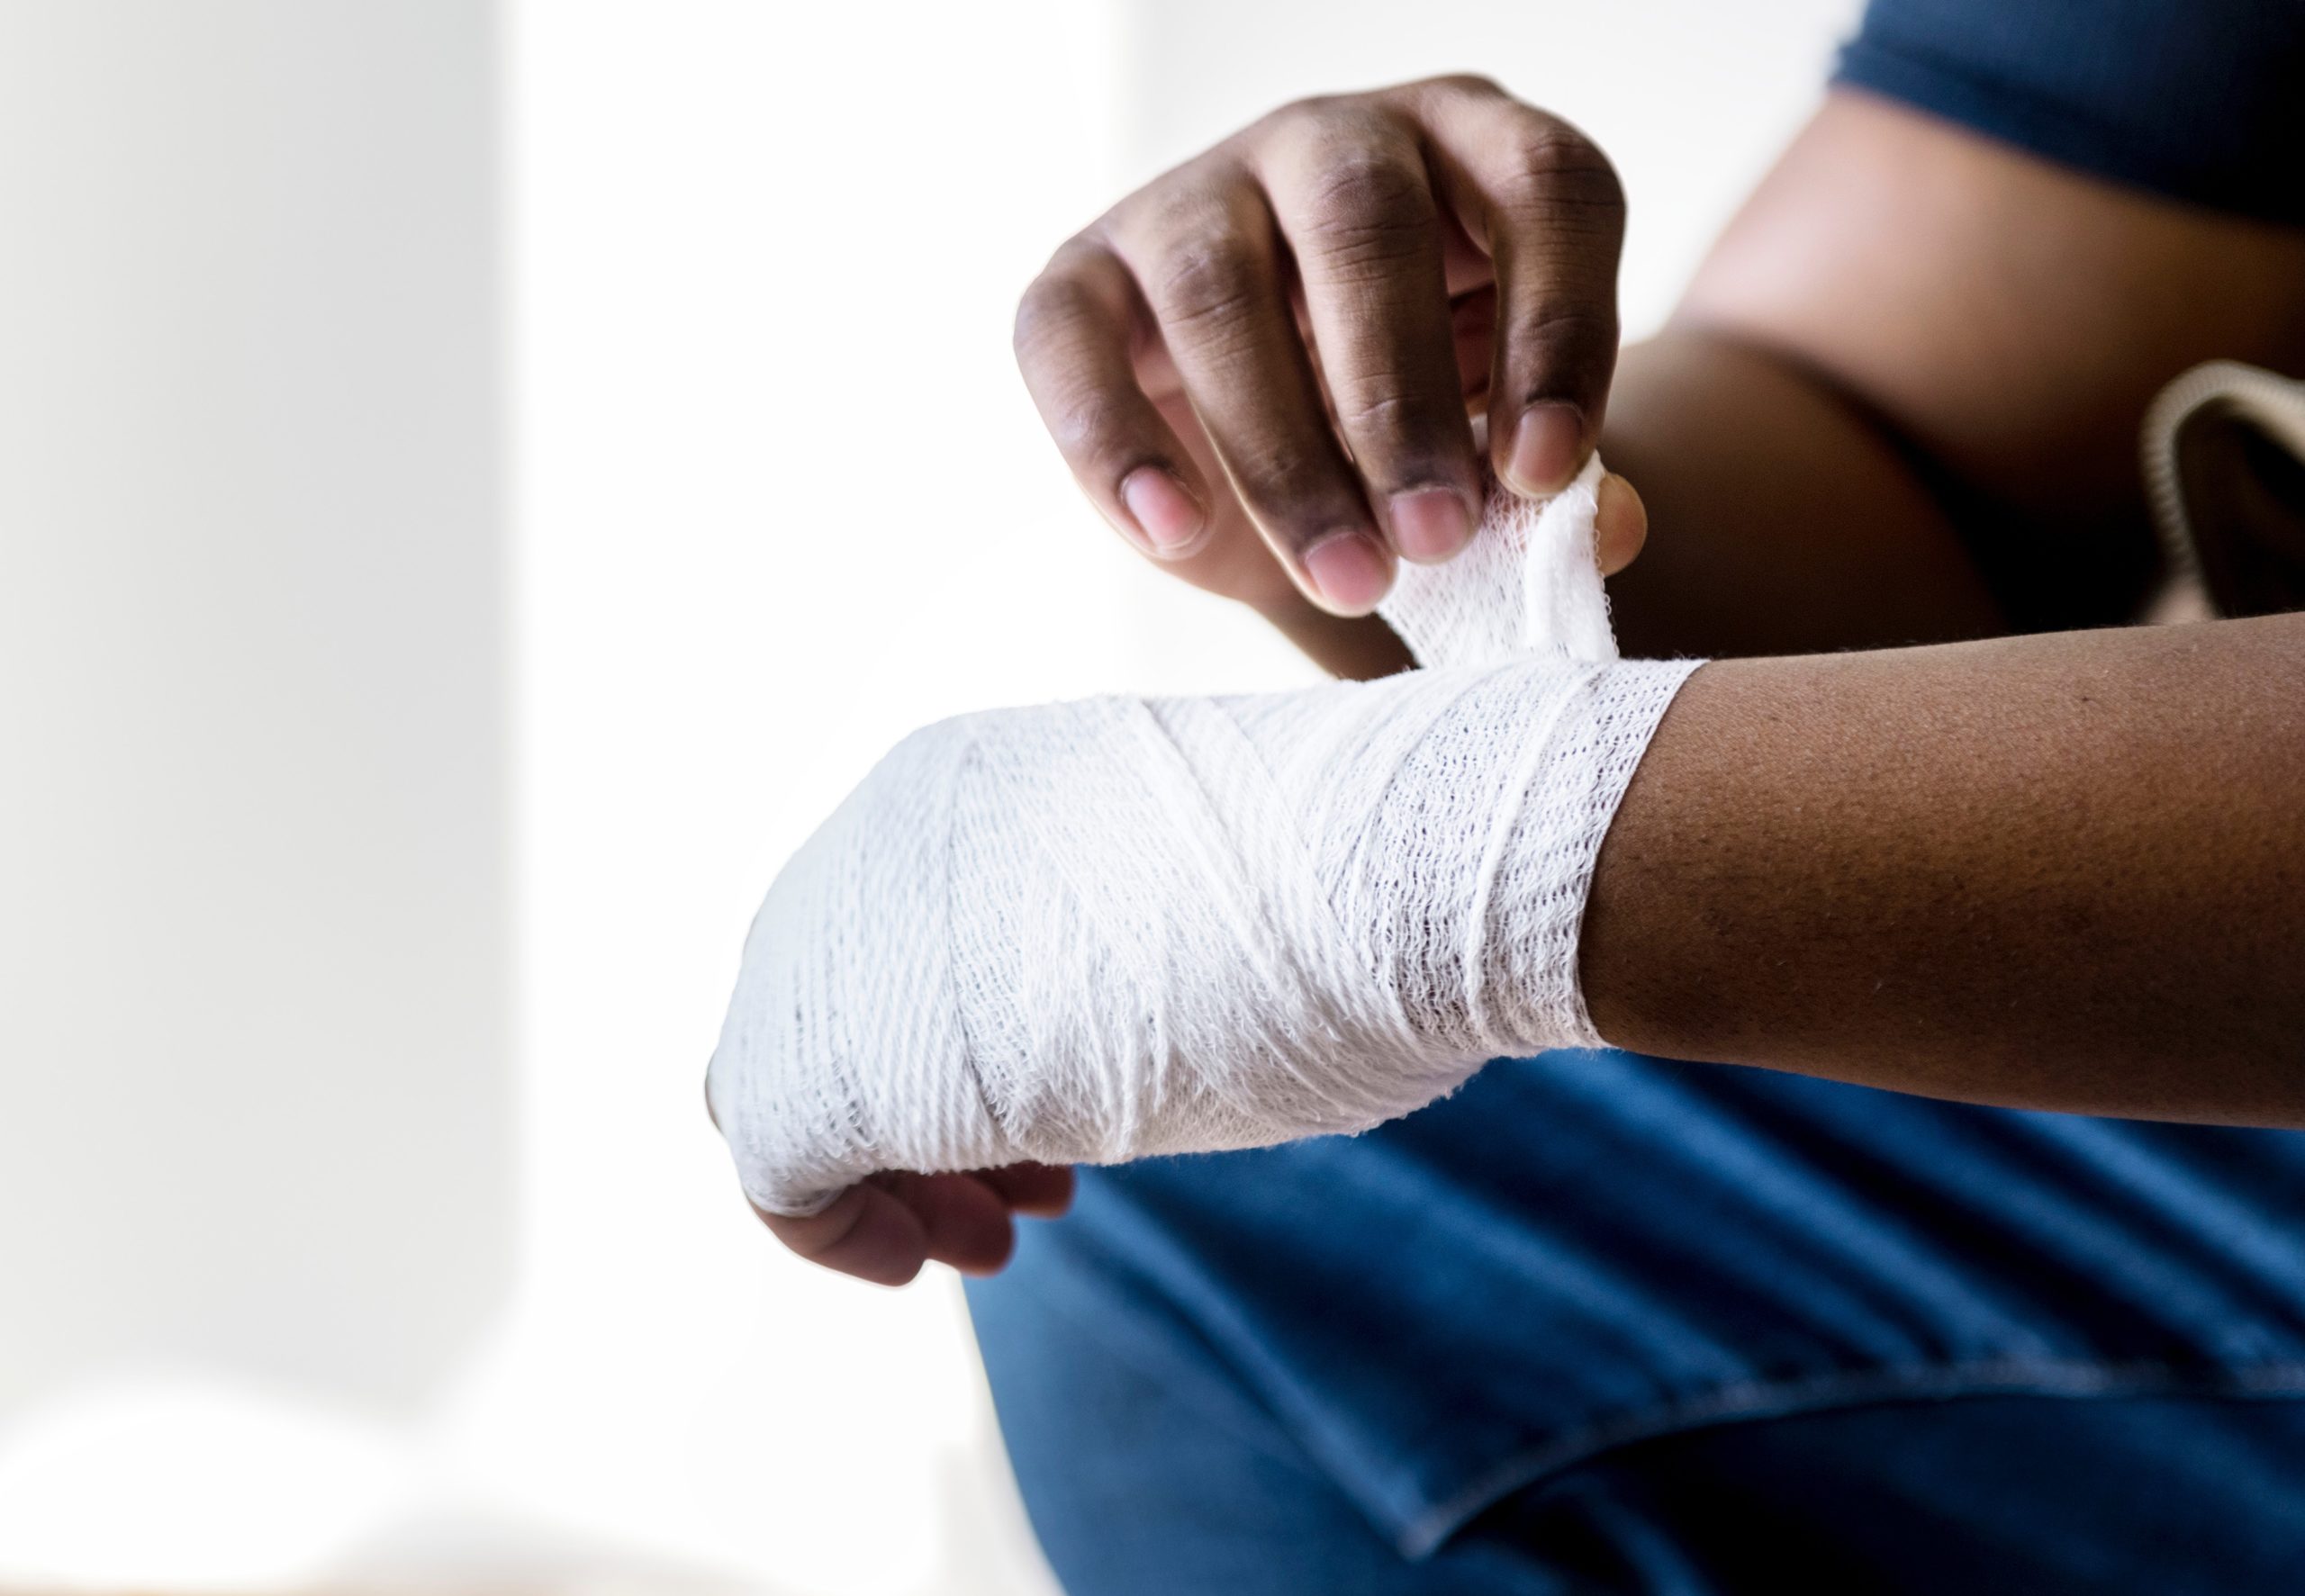 image of an arm injury caused by a slip and fall